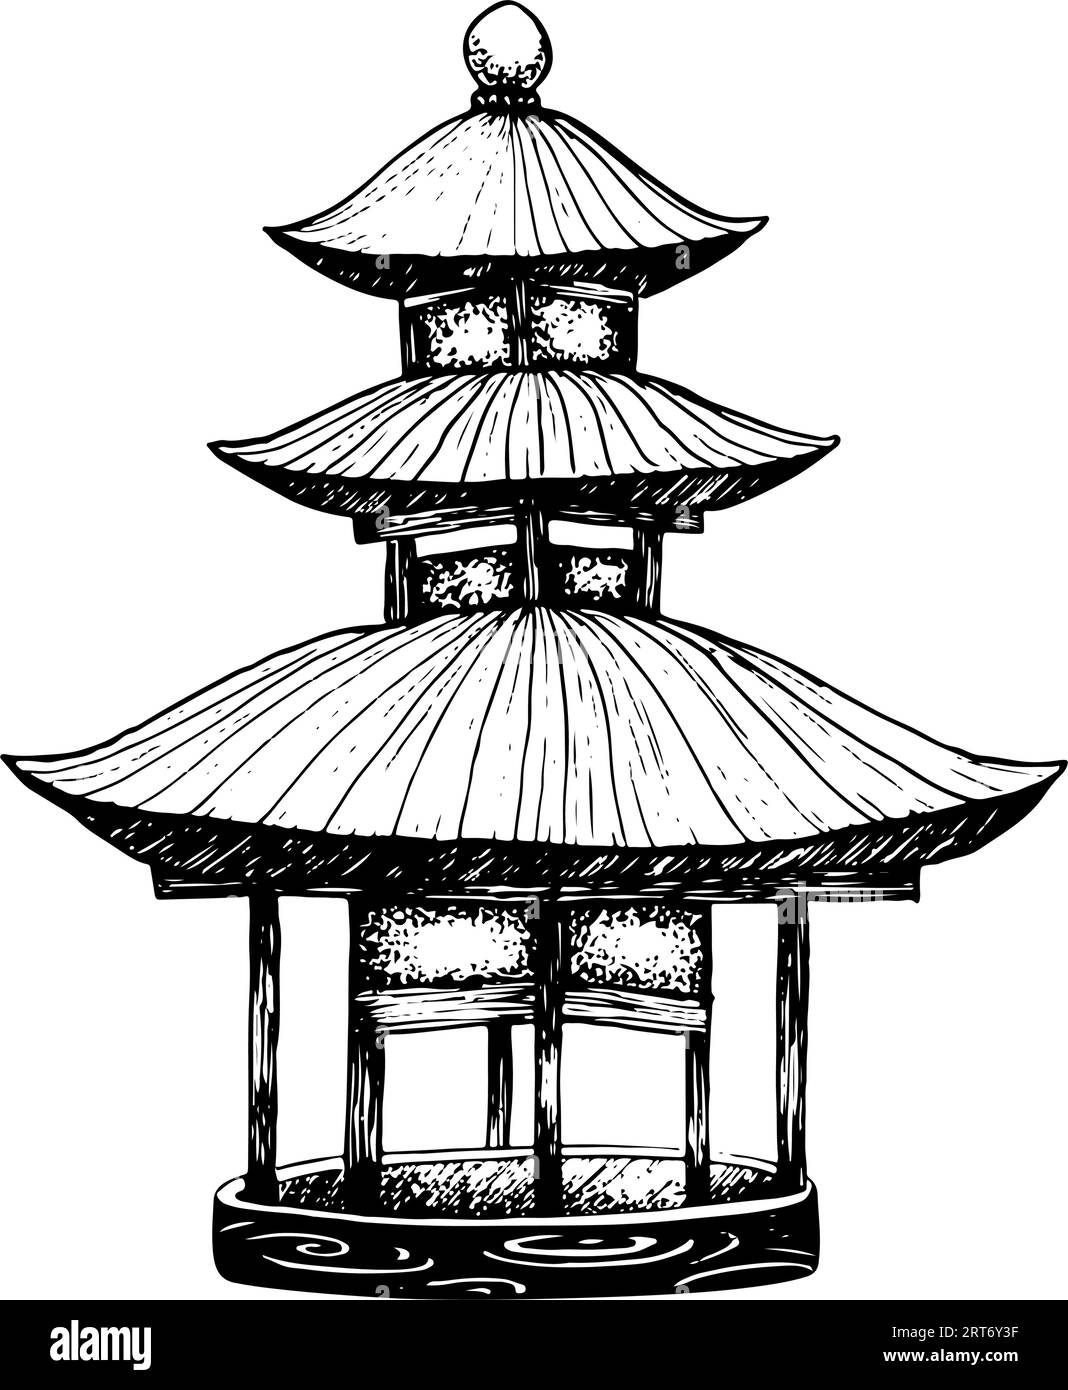 Vector pagoda house graphic black and white illustration. Traditional Japanese or Nepal architecture building of Asian culture. Stock Vector